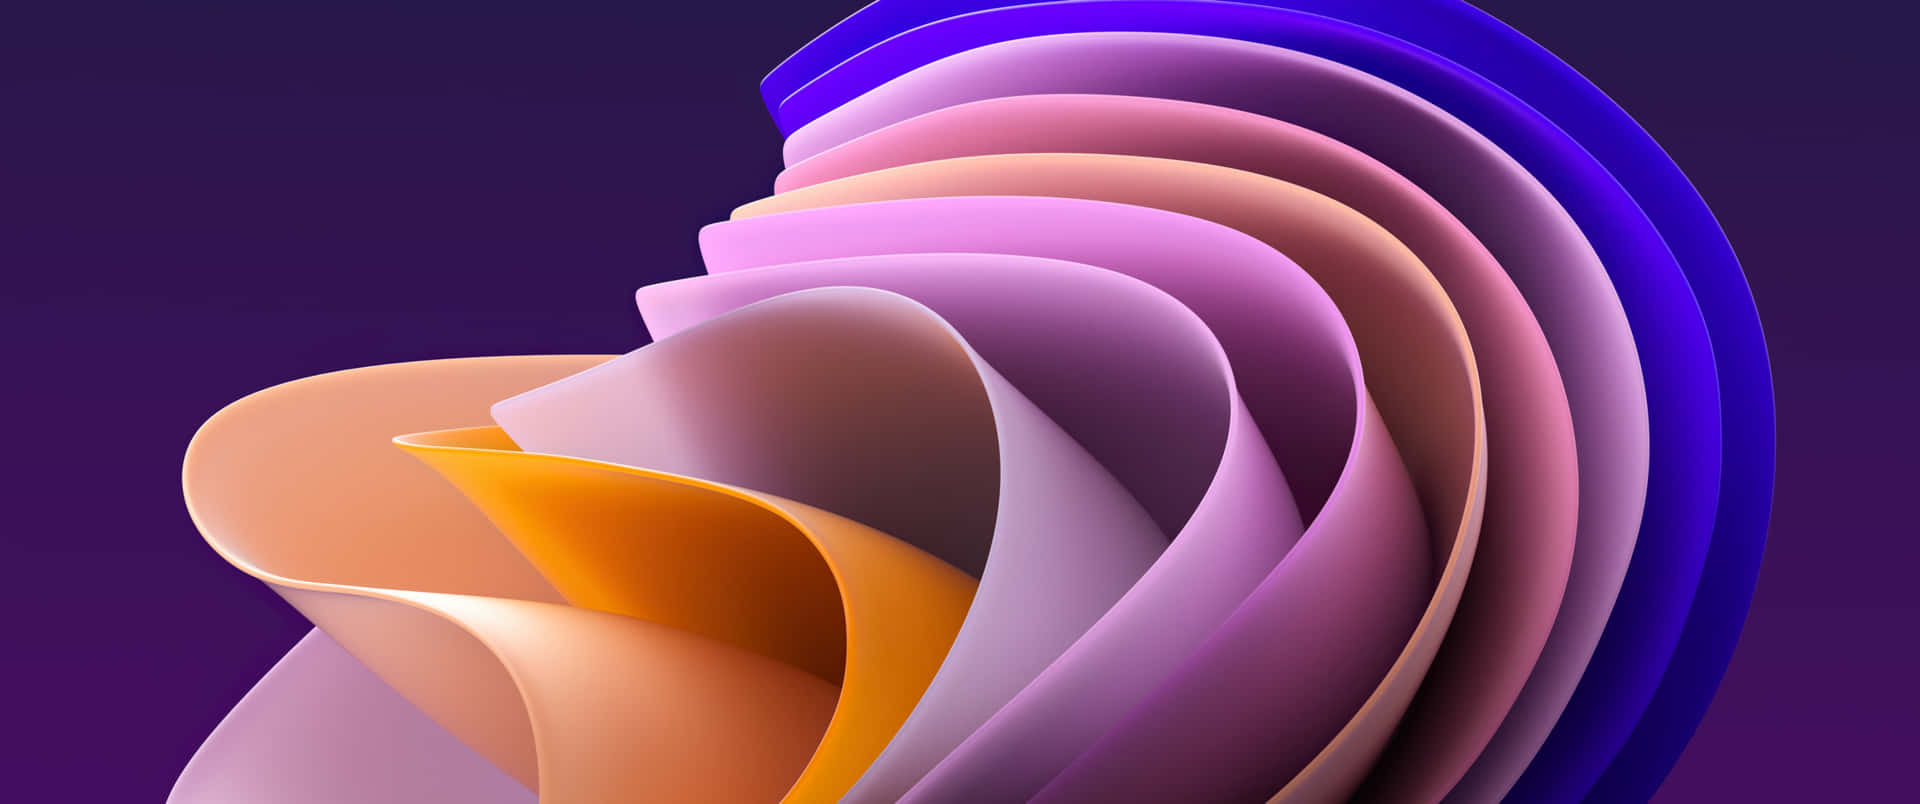 3440x1440p Colorful Layers Abstract Background